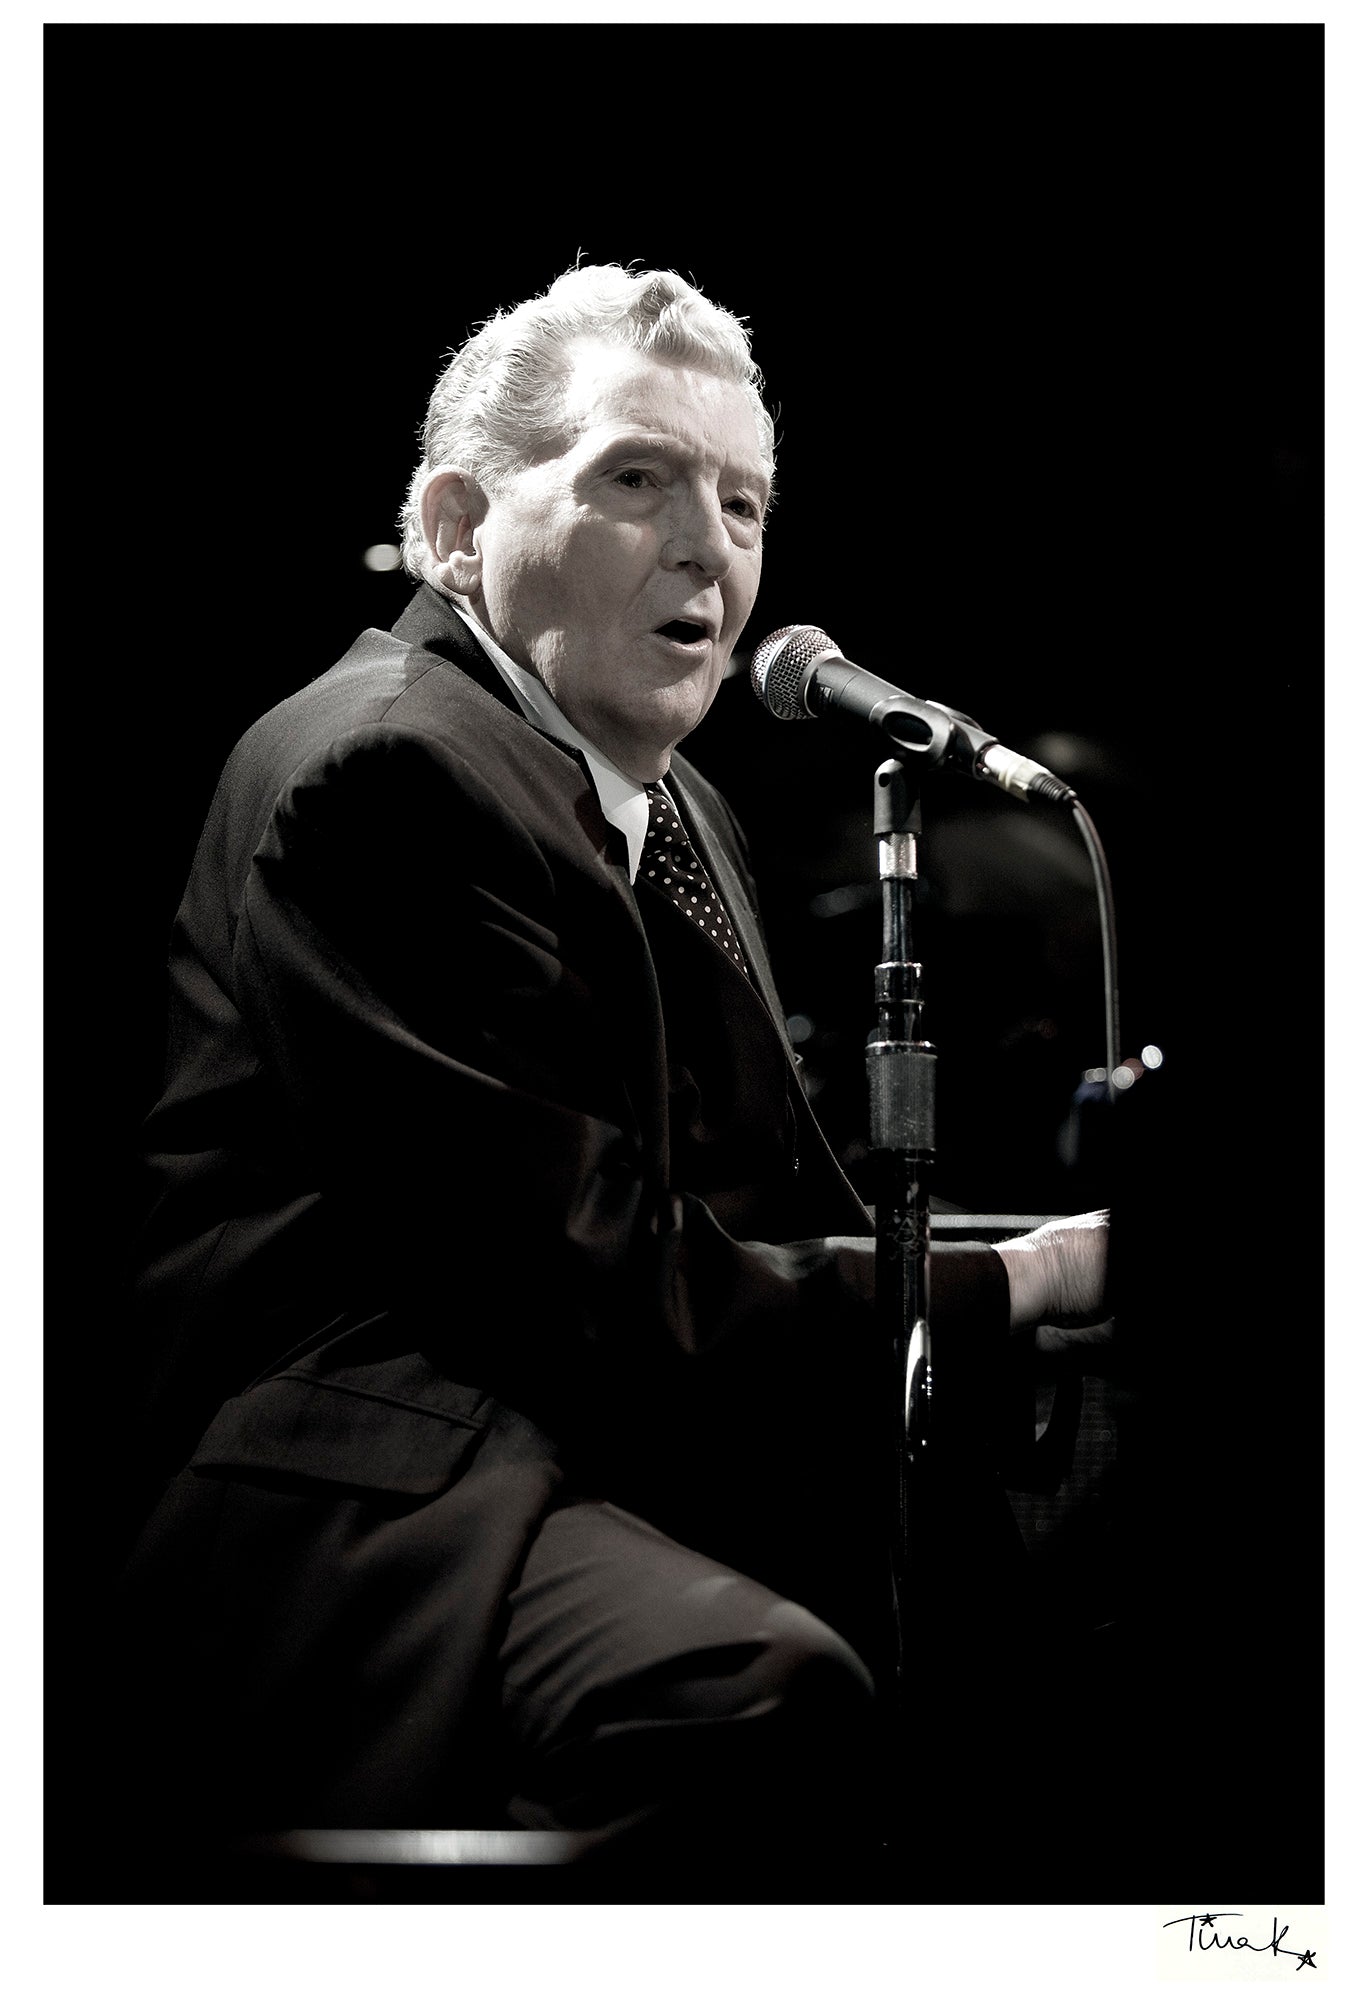 Unframed music wall art print of pioneering Rock and Roll singer and pianist Jerry Lee Lewis, The Killer, sitting at piano onstage in 2008